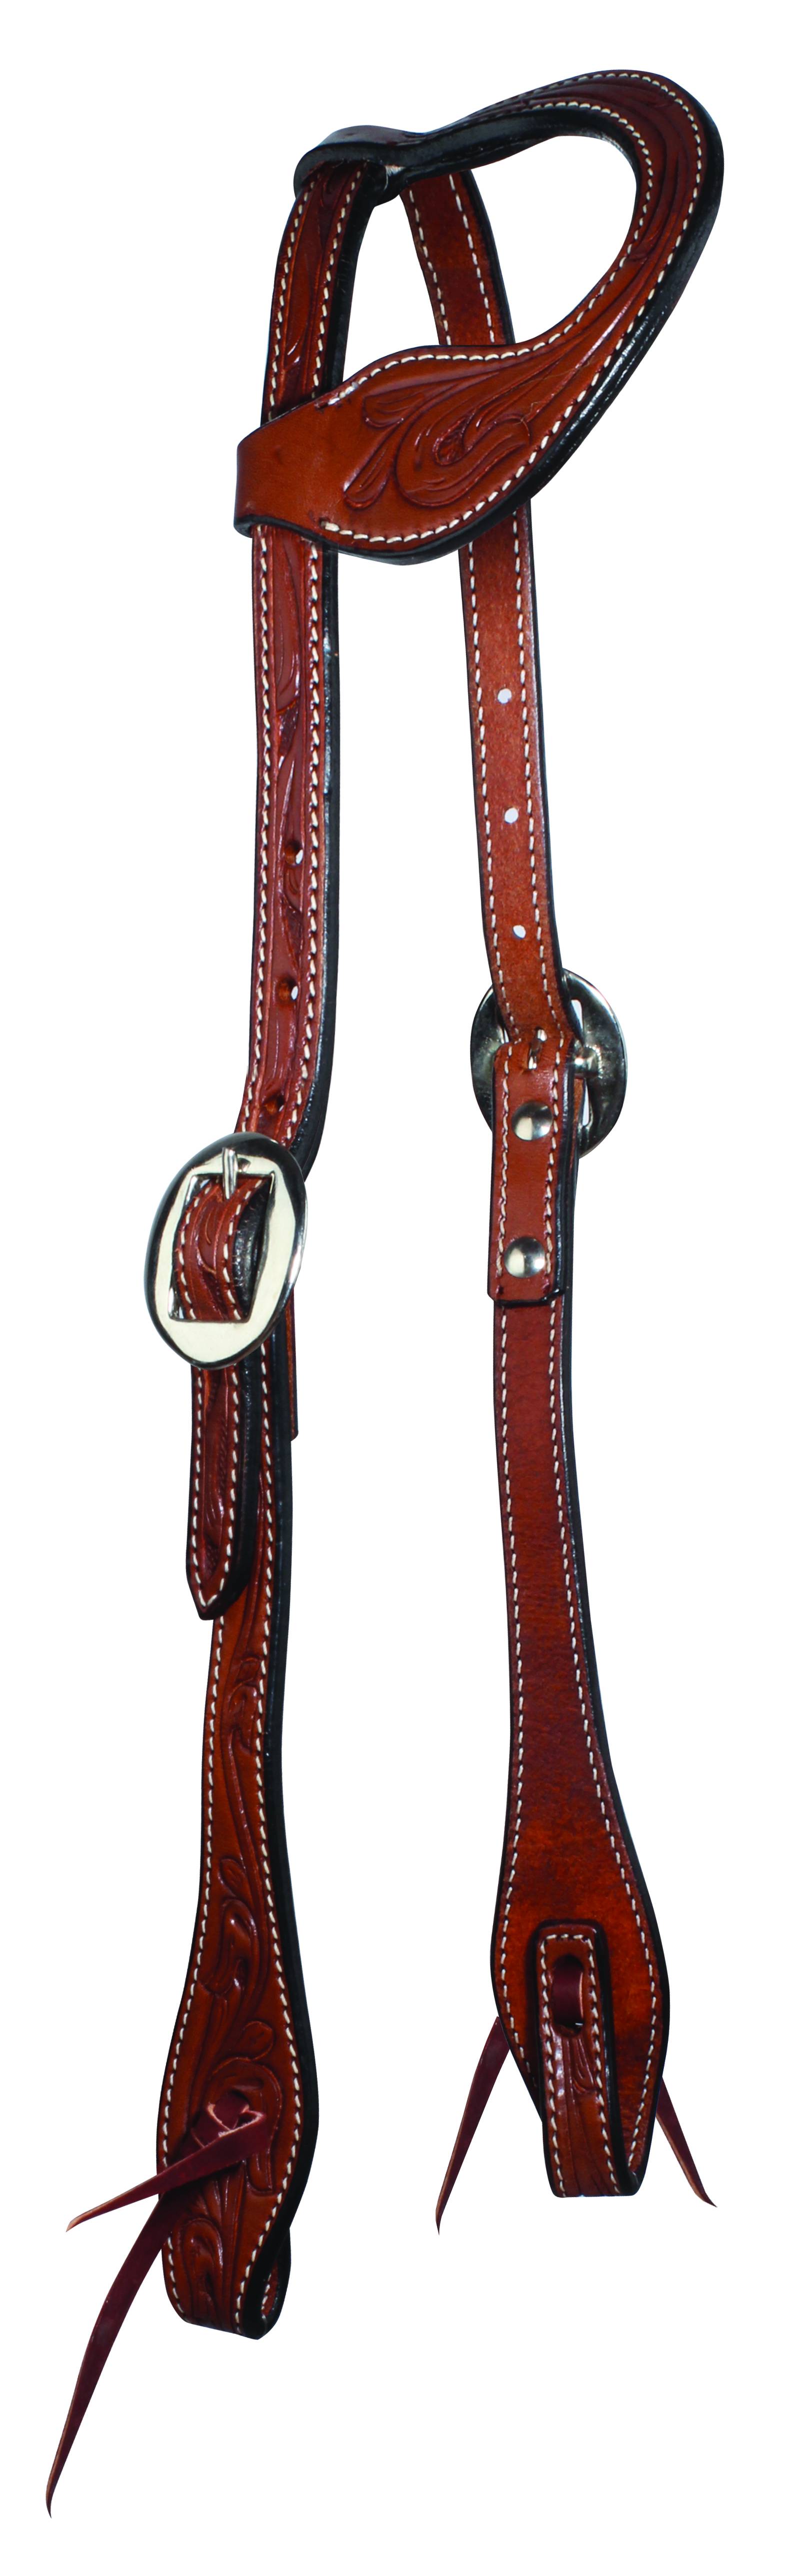 3P1027-C Professionals Choice Heritage One Ear Headstall sku 3P1027-C